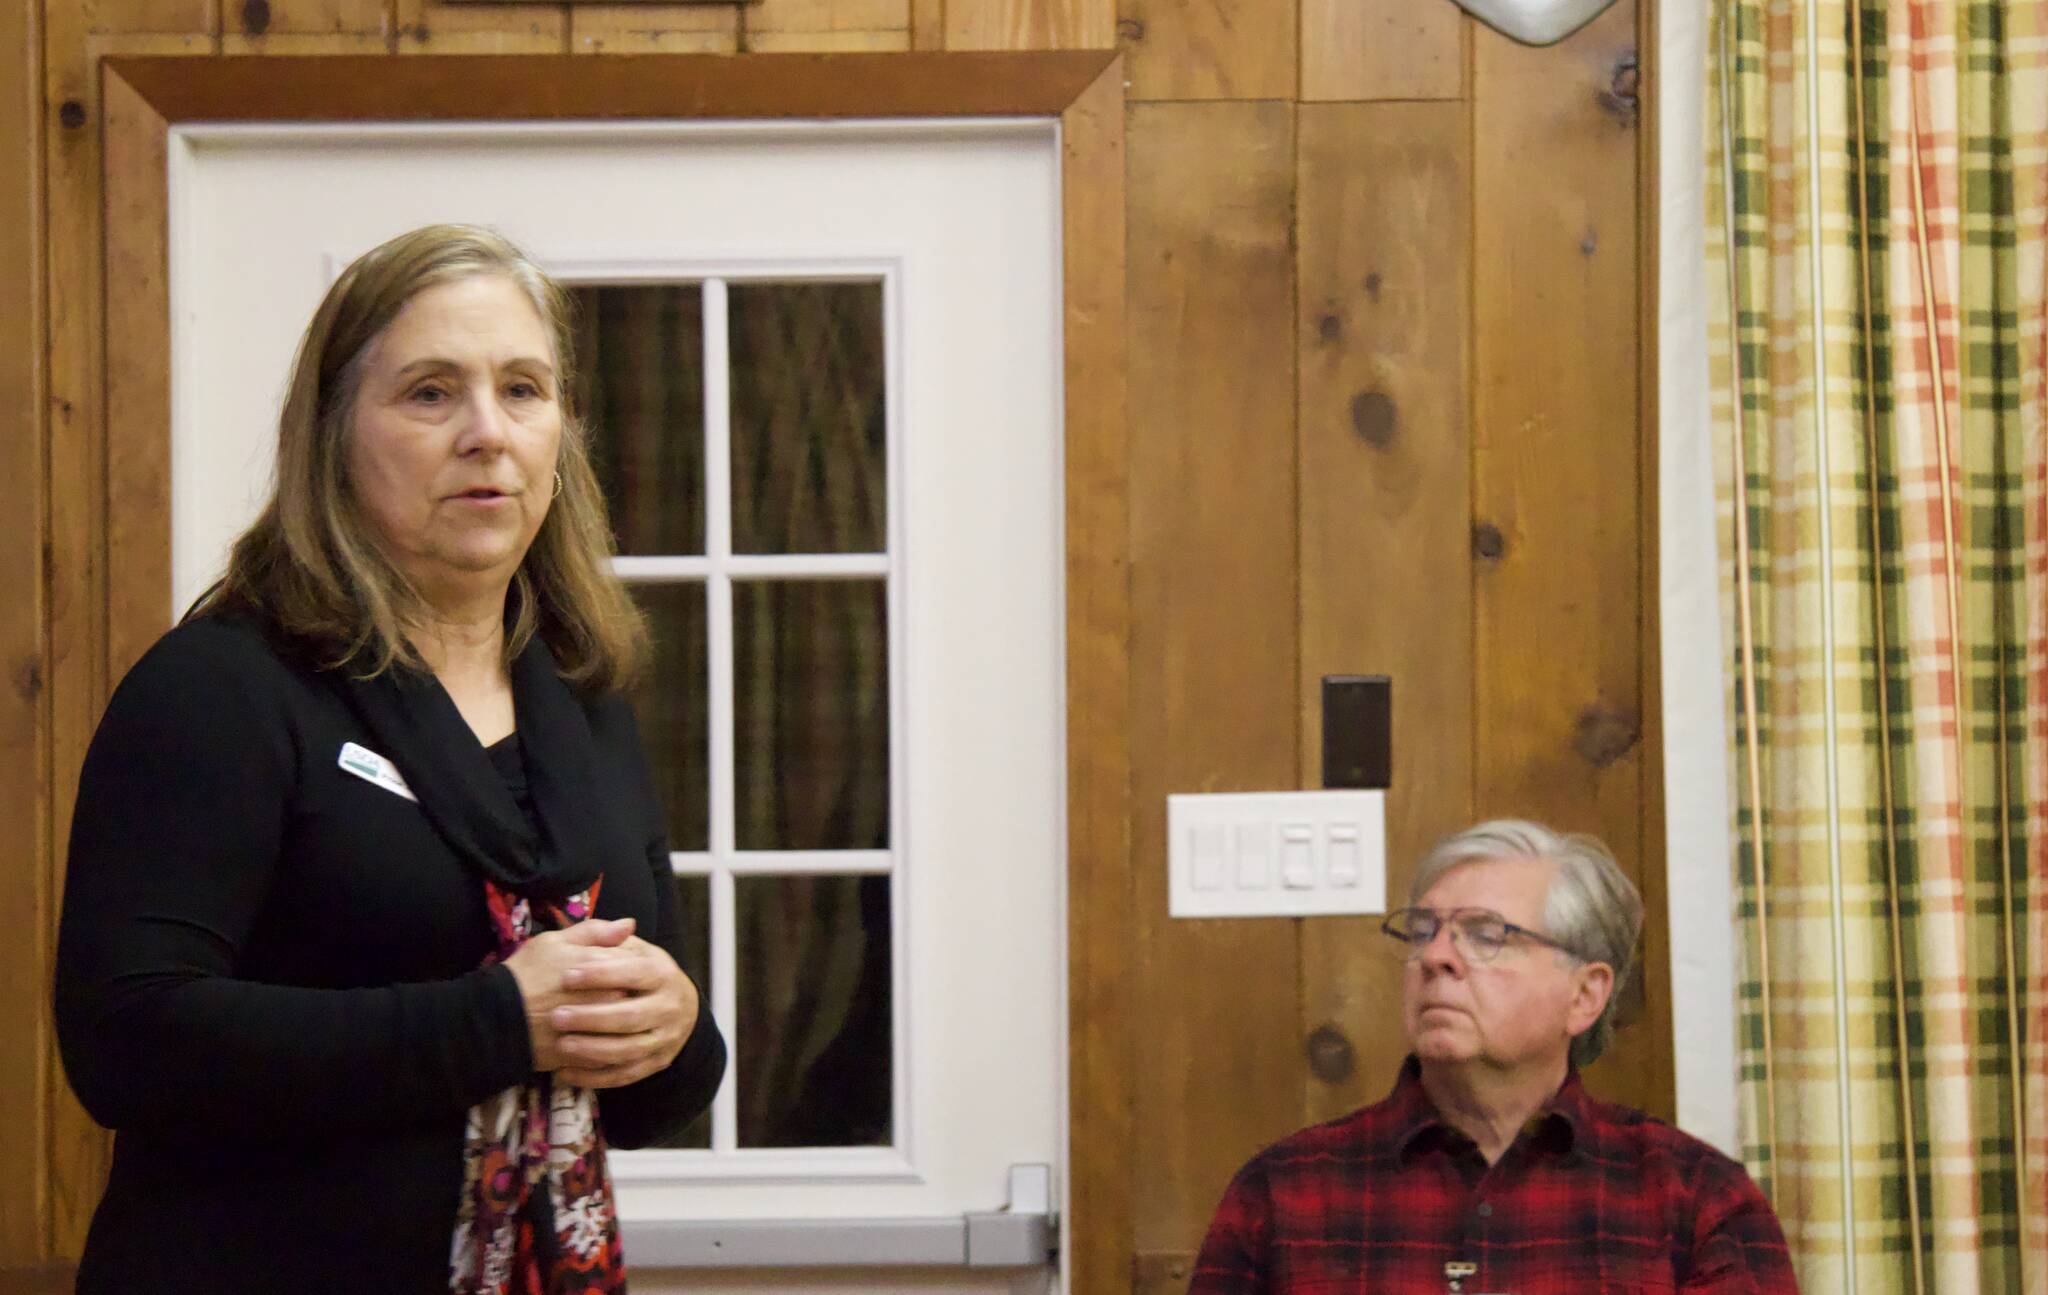 Photo by Rachel Rosen/Whidbey News-Times
Helen Price Johnson, Director of Rural Development at the United States Department of Agriculture, spoke at the Greenbank Progressive Club Nov. 10.